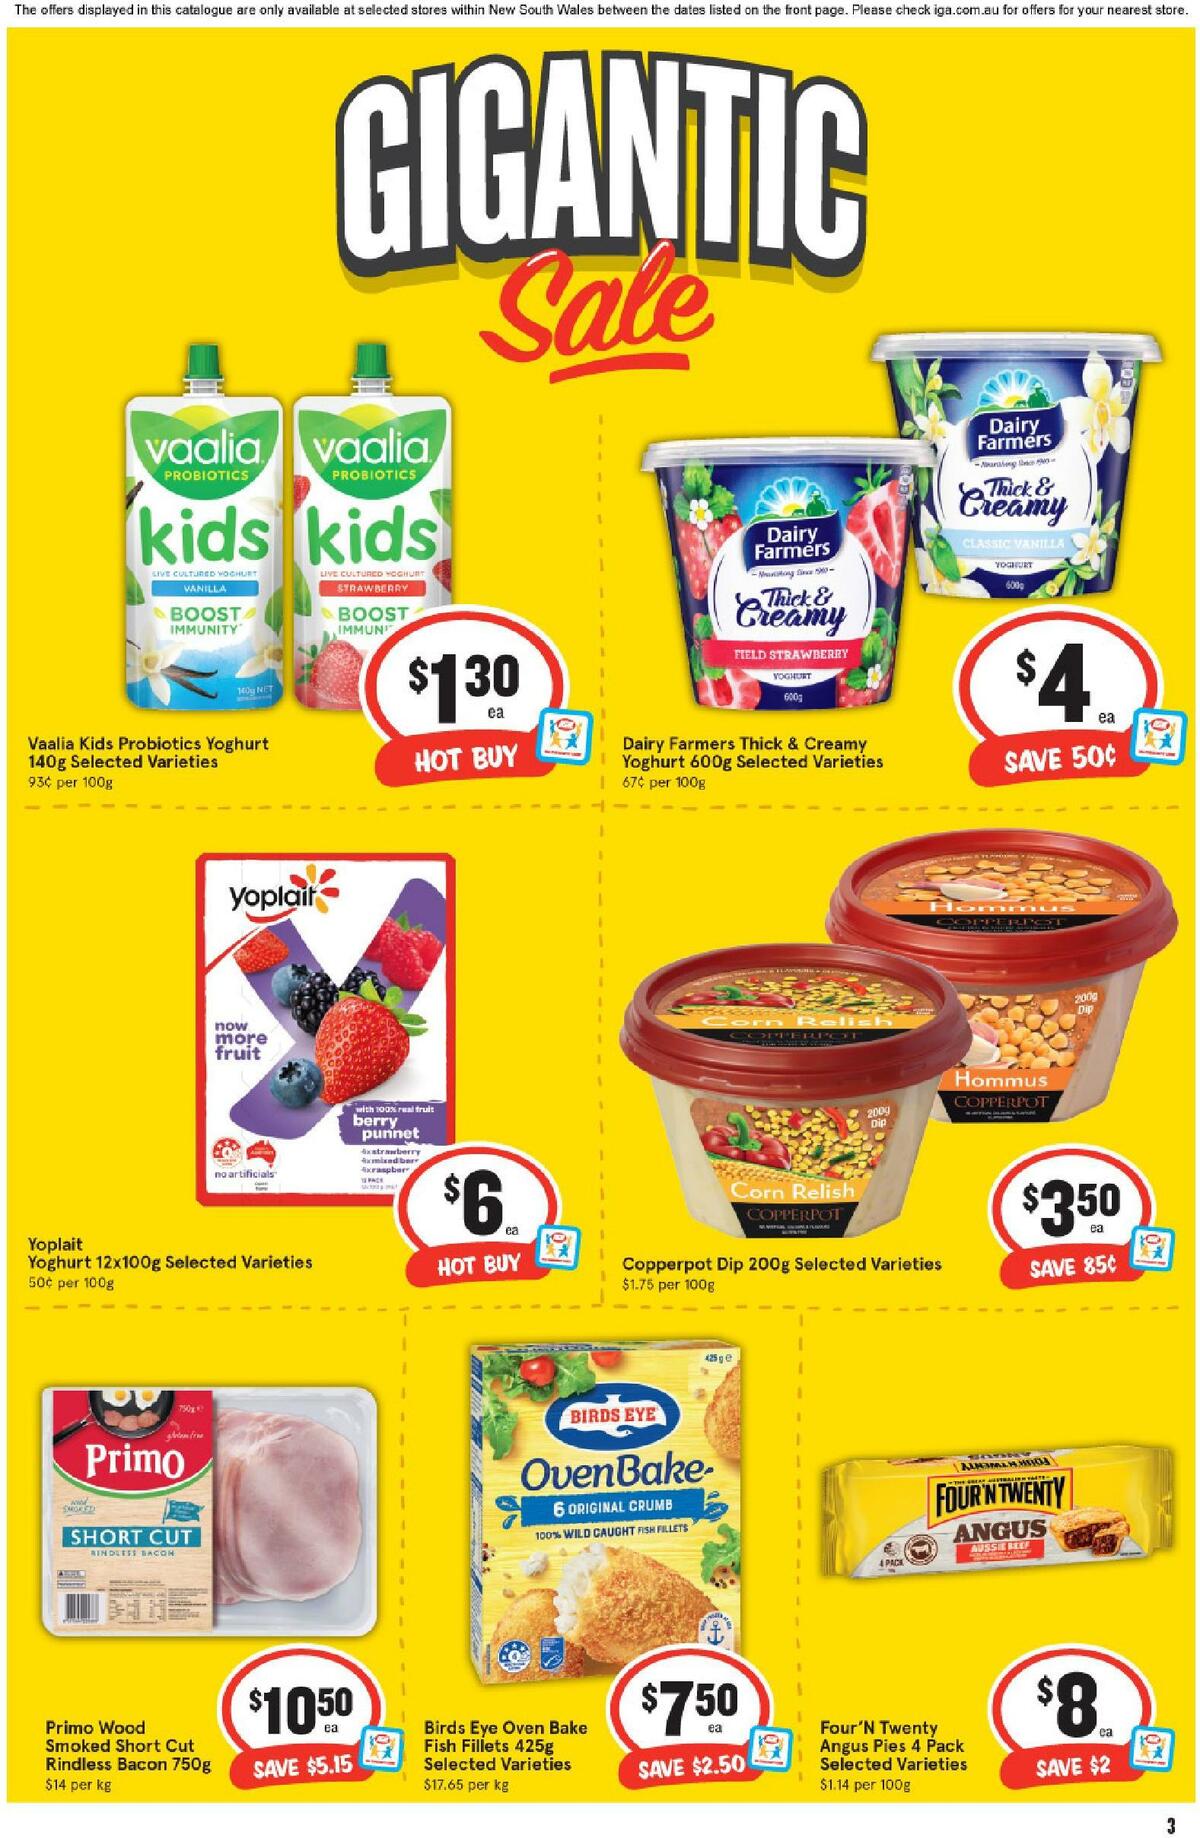 IGA Catalogues from 15 June